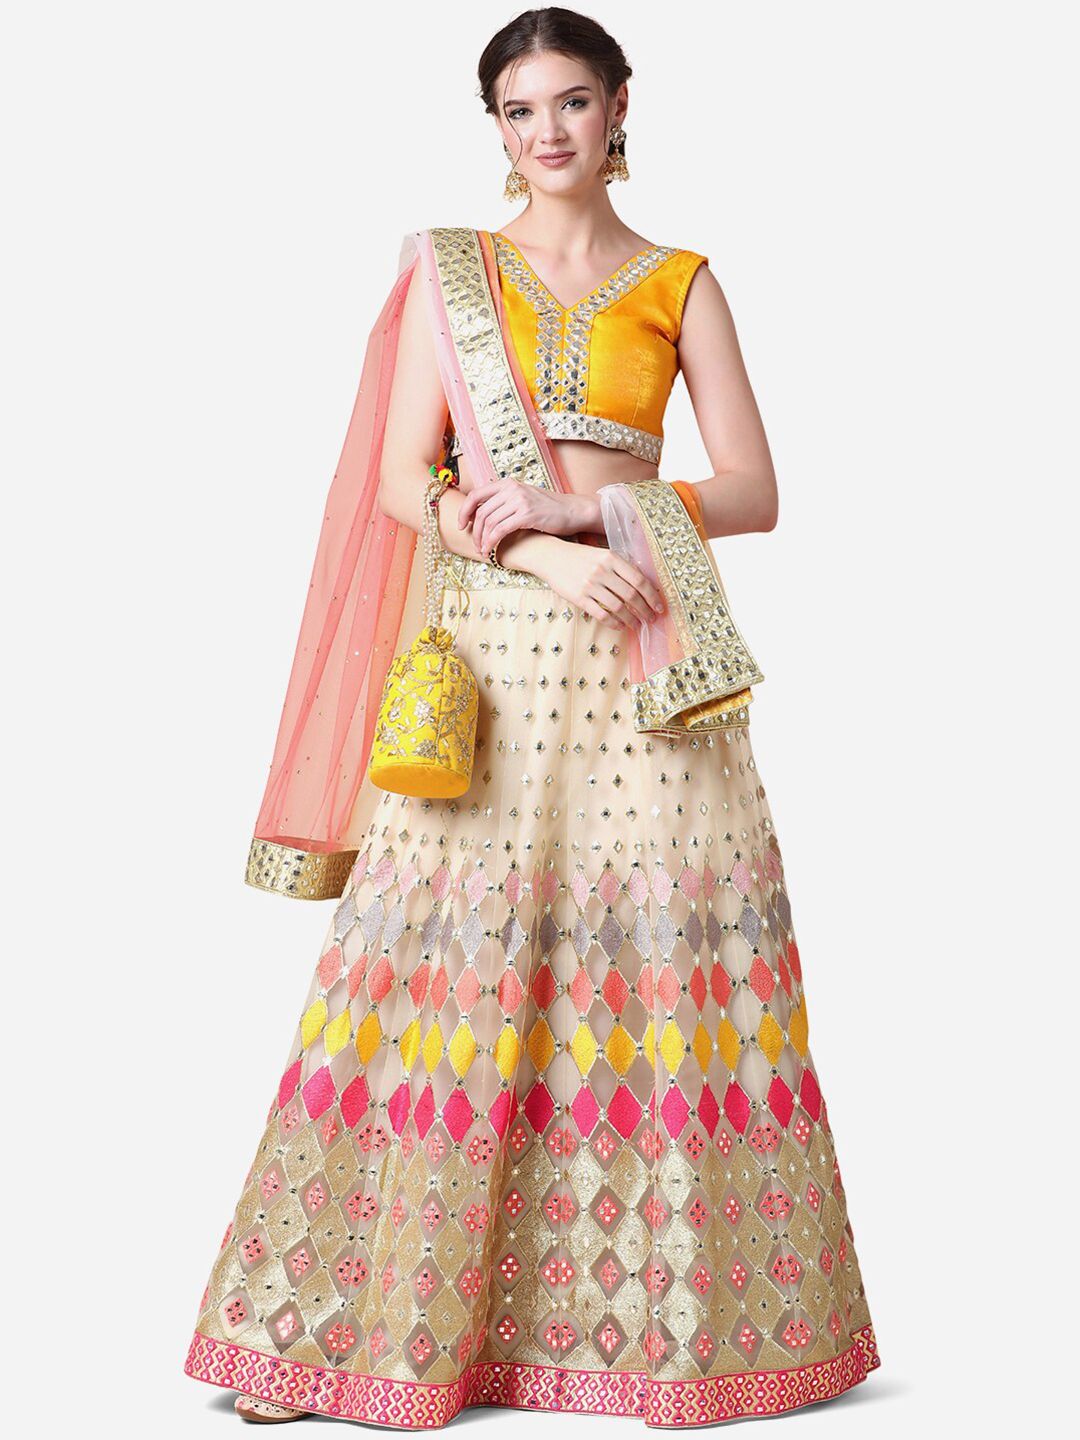 Cloth's Villa Cream-Coloured & Yellow Embellished Semi-Stitched Lehenga & Unstitched Blouse With Dupatta Price in India